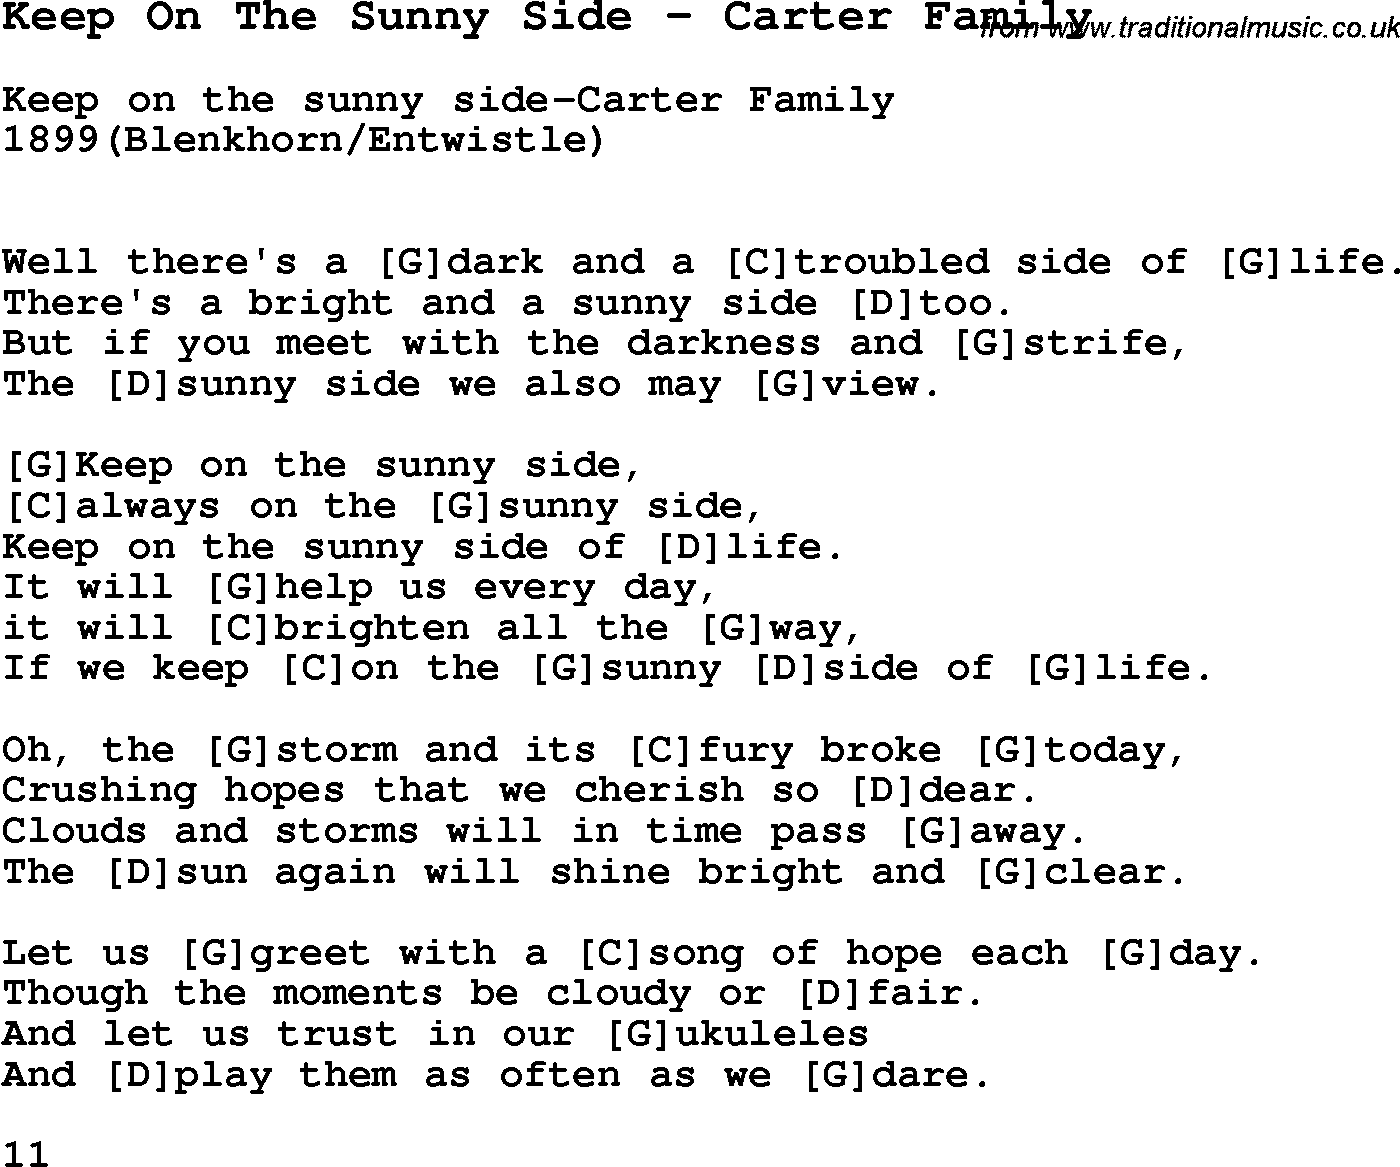 Song Keep On The Sunny Side by Carter Family, with lyrics for vocal performance and accompaniment chords for Ukulele, Guitar Banjo etc.